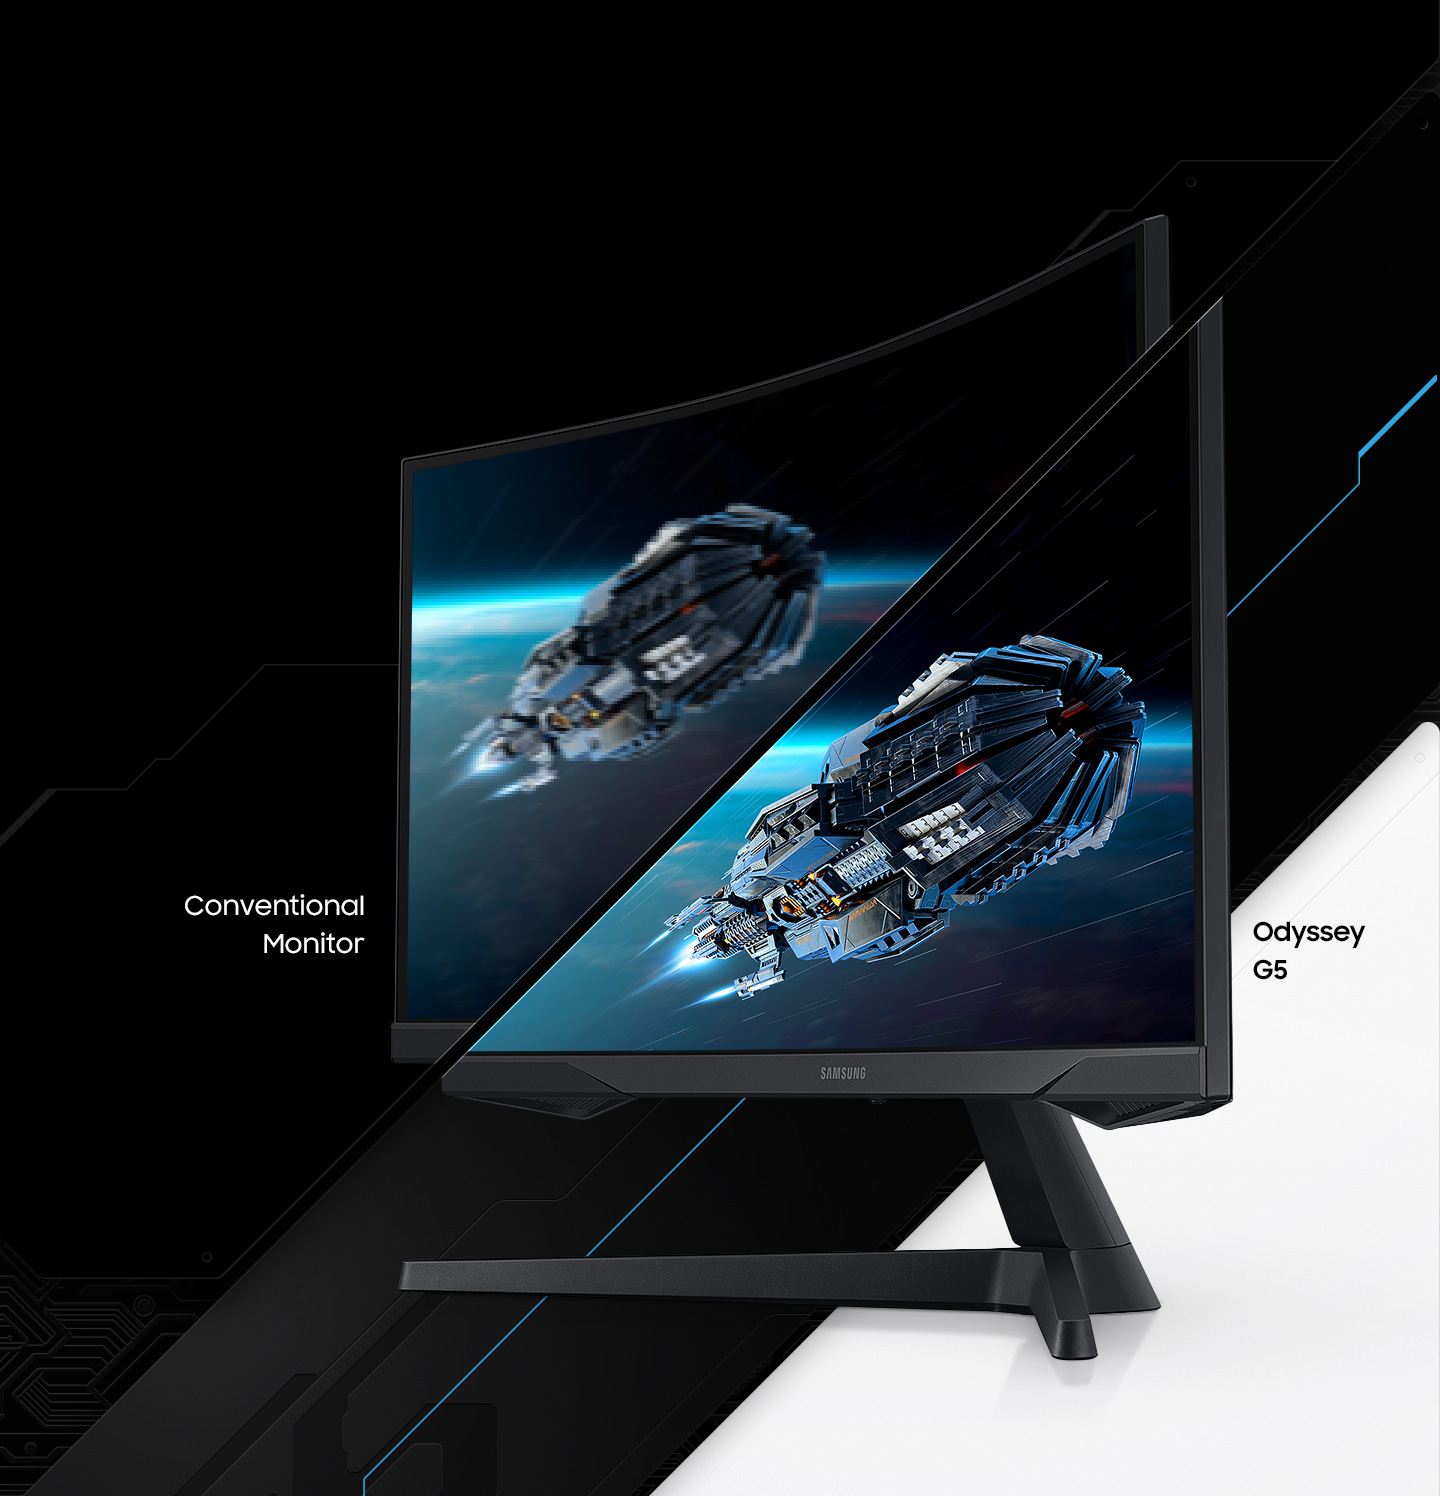 32" G5 Odyssey Gaming Monitor With 1000R Curved Screen - LC32G57TQWNXDC | Samsung US